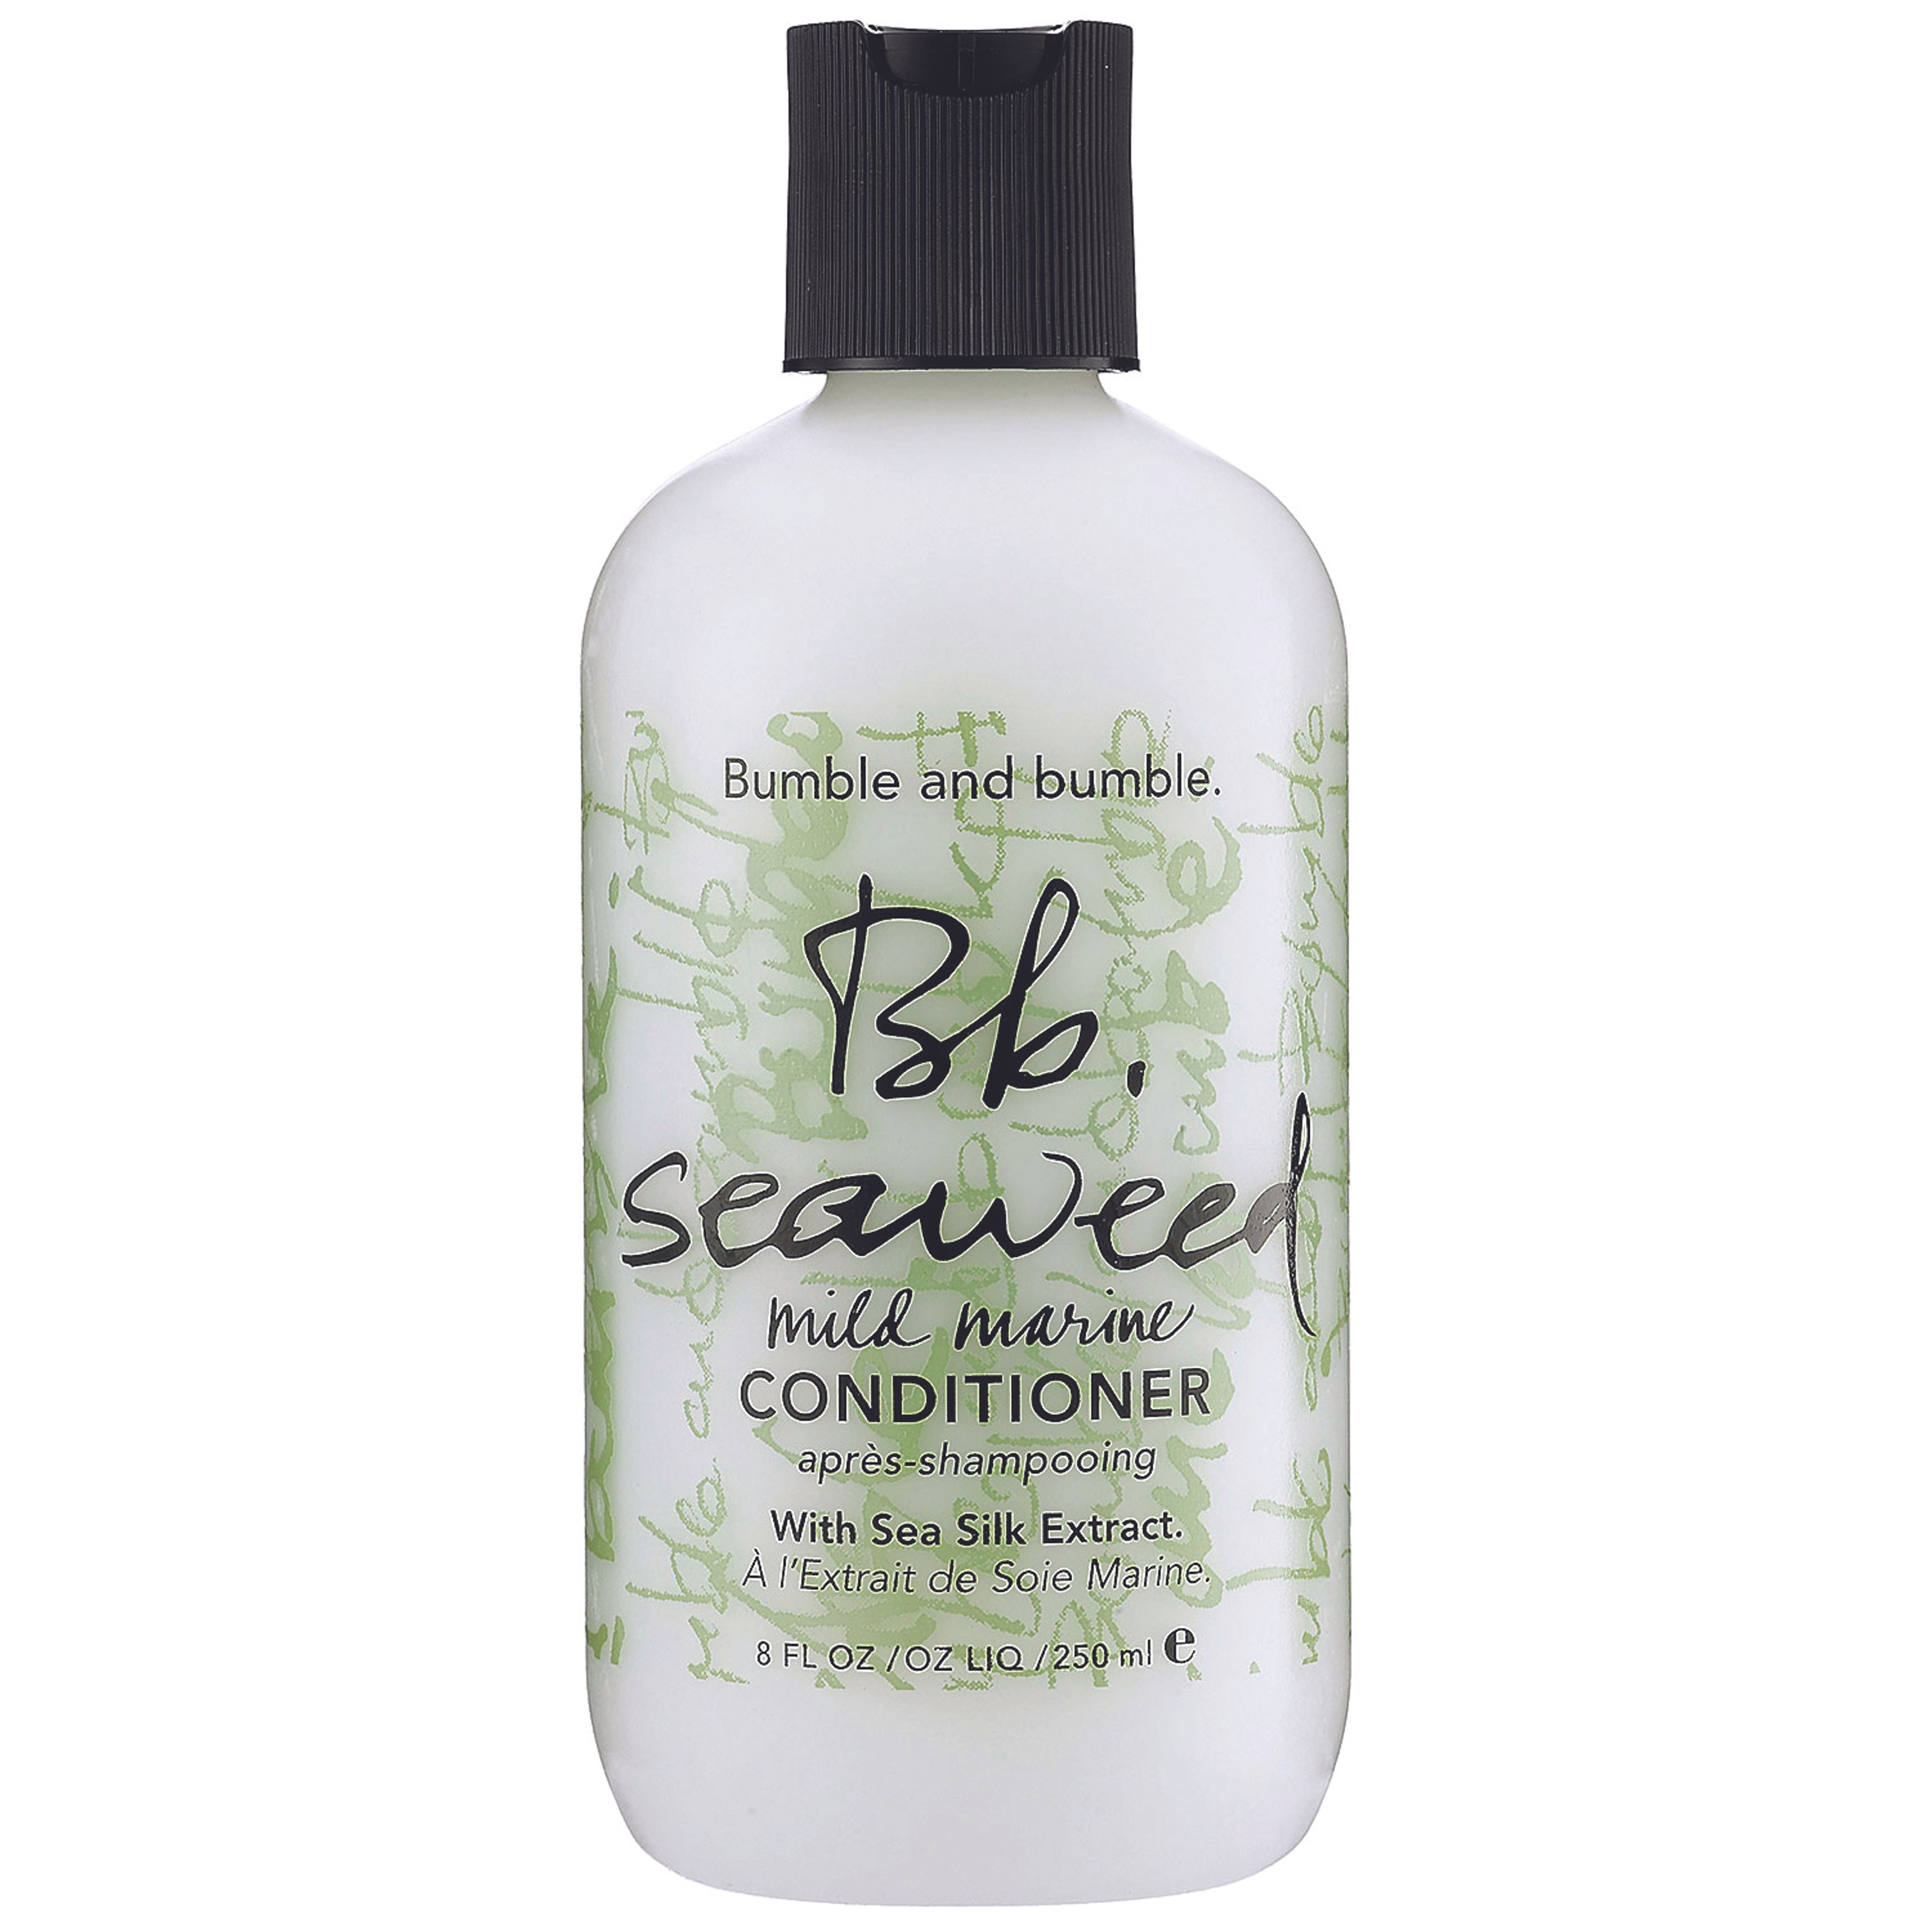 Bumble and bumble Seaweed Conditioner 1